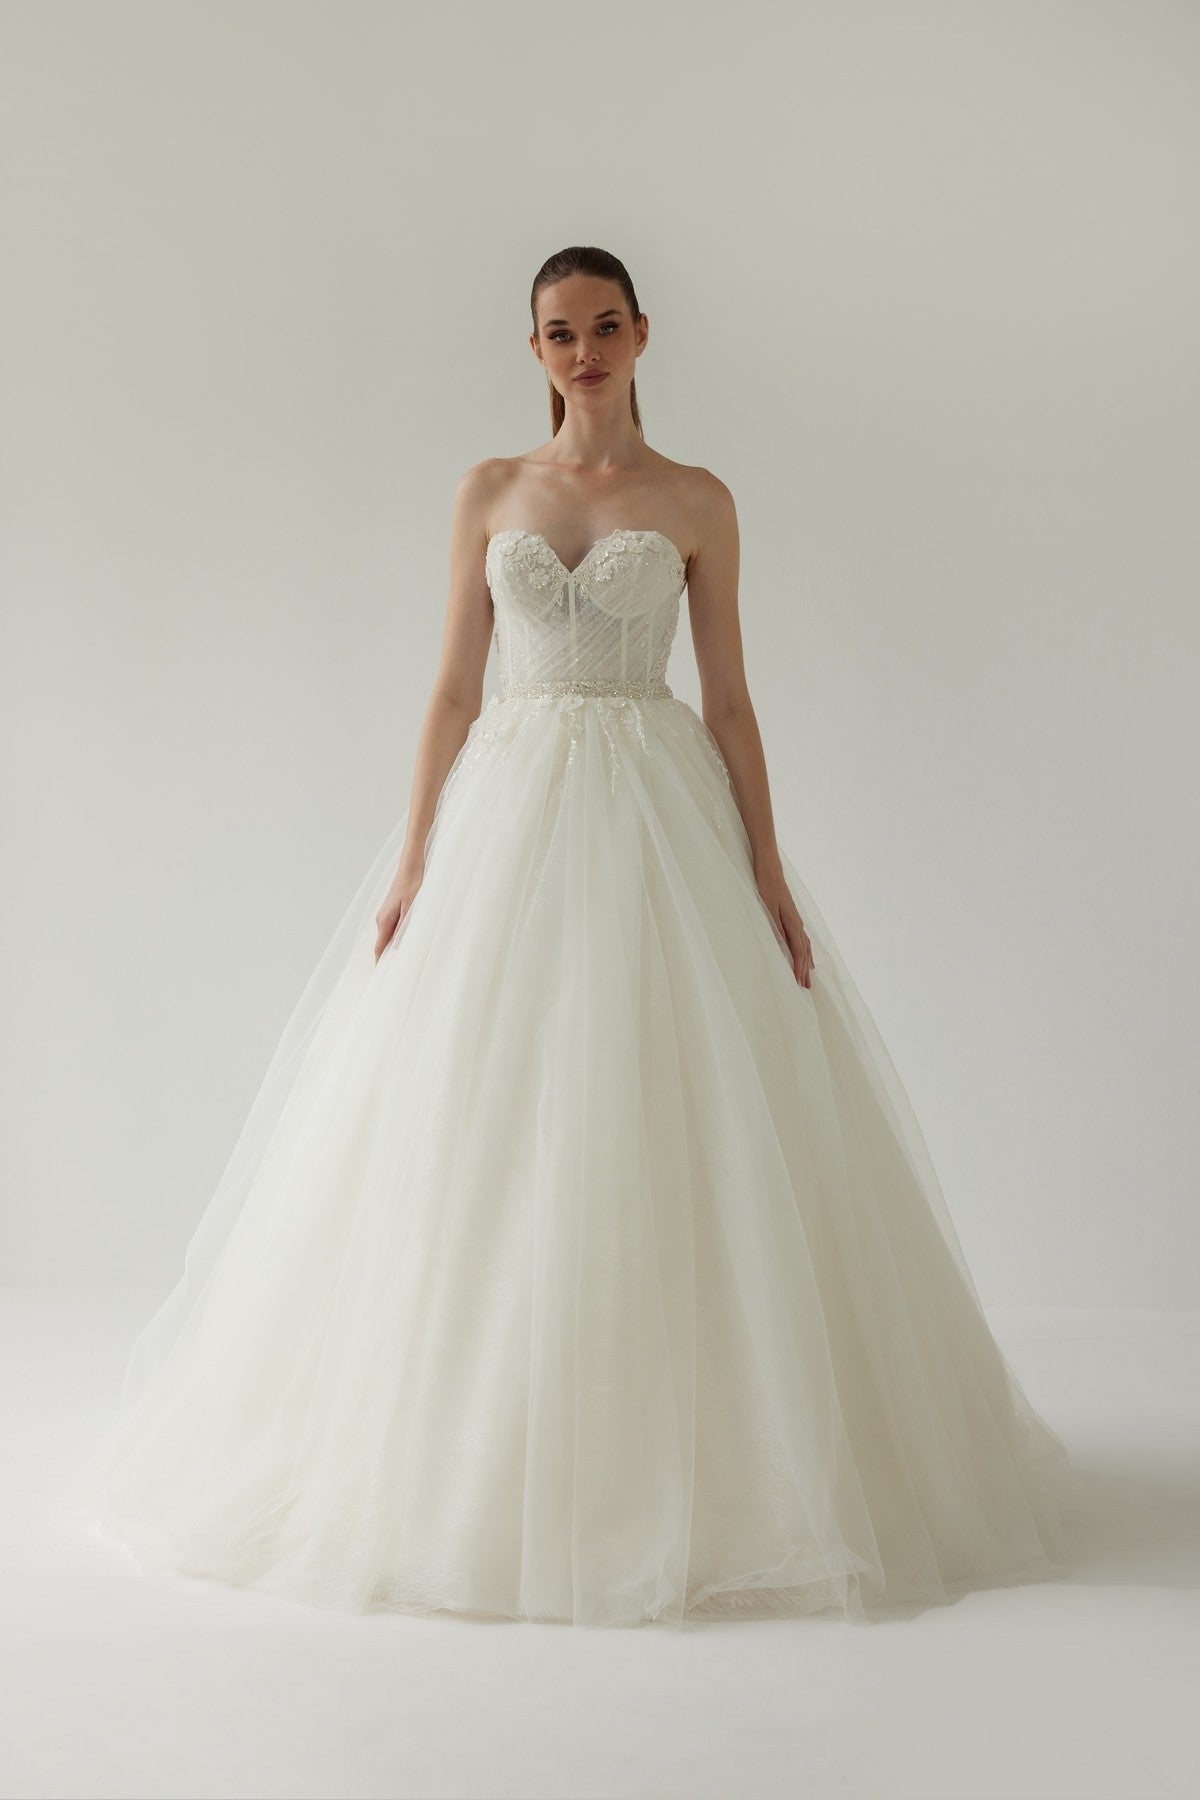 Strapless A-Line Wedding Dress with Drape Detail and Sweetheart Neckline